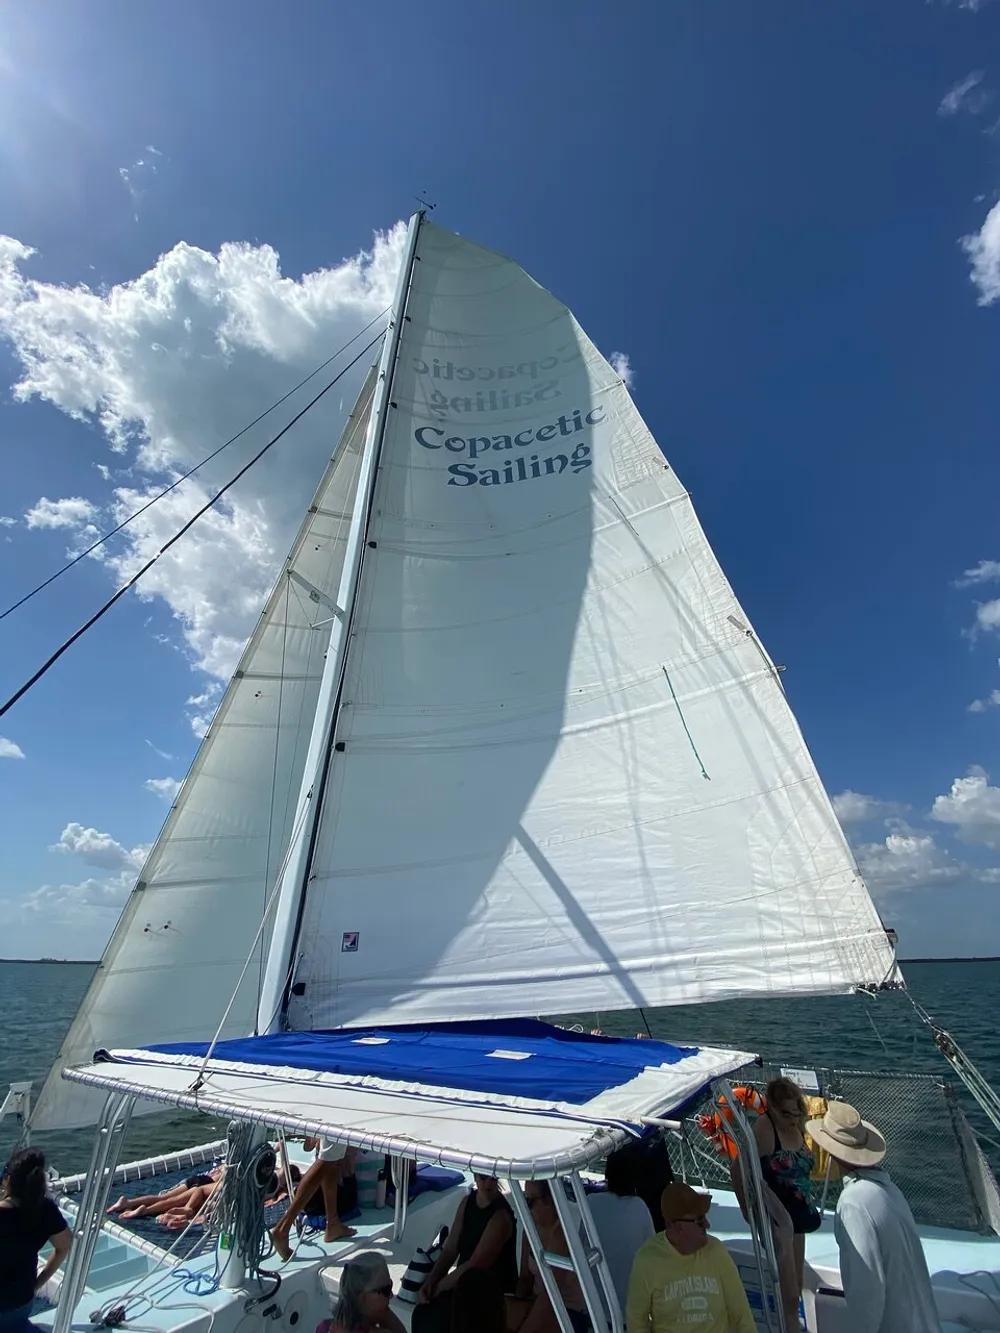 A group of people enjoy a sunny day on a sailboat with a large white sail set against a clear blue sky with some clouds